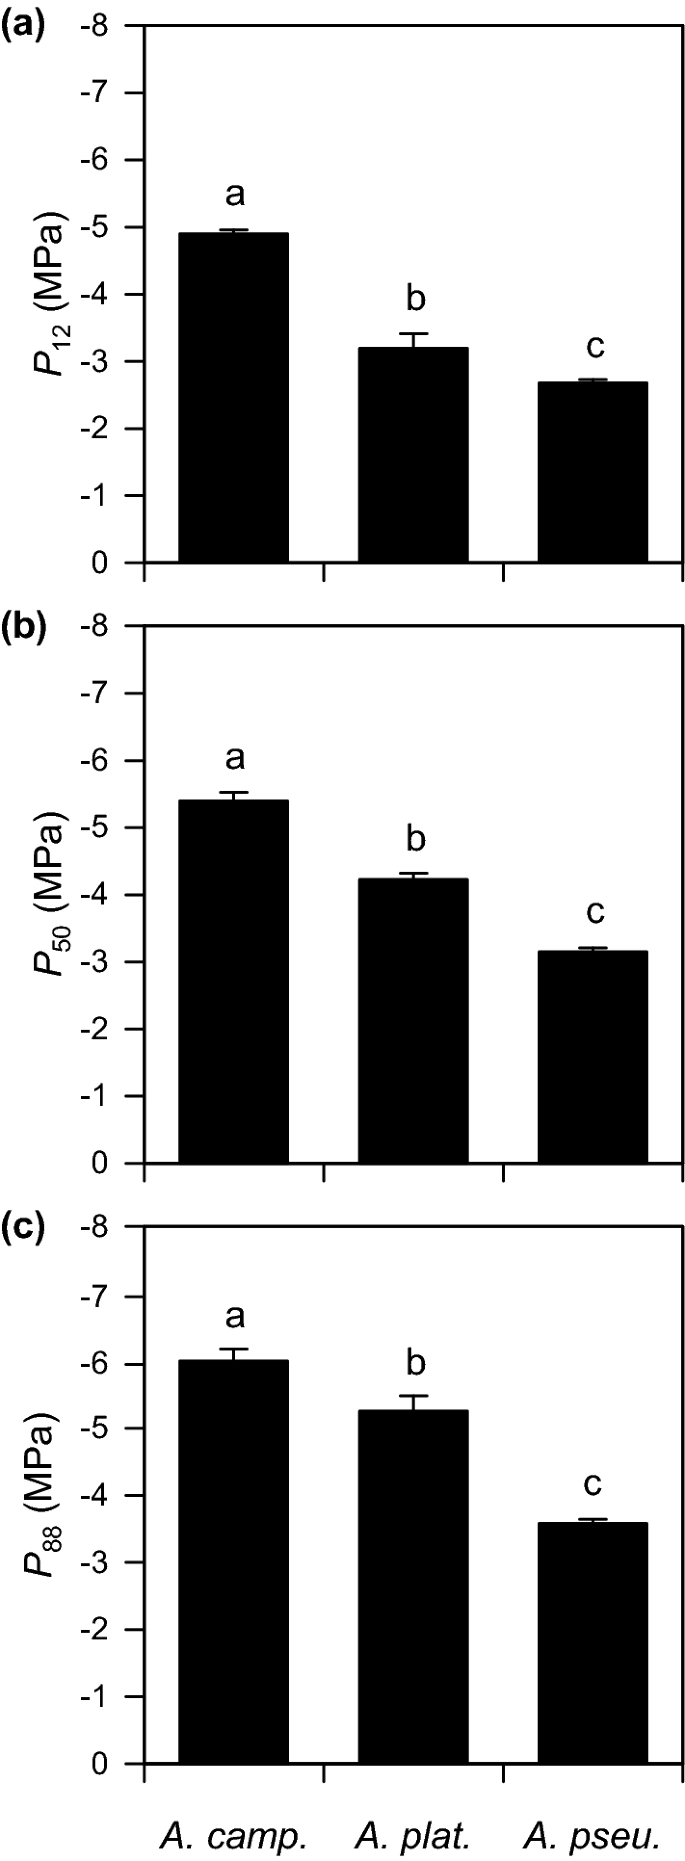 Xylem Hydraulic Safety And Efficiency In Relation To Leaf And Wood Traits In Three Temperate Acer Species Differing In Habitat Preferences Springerlink